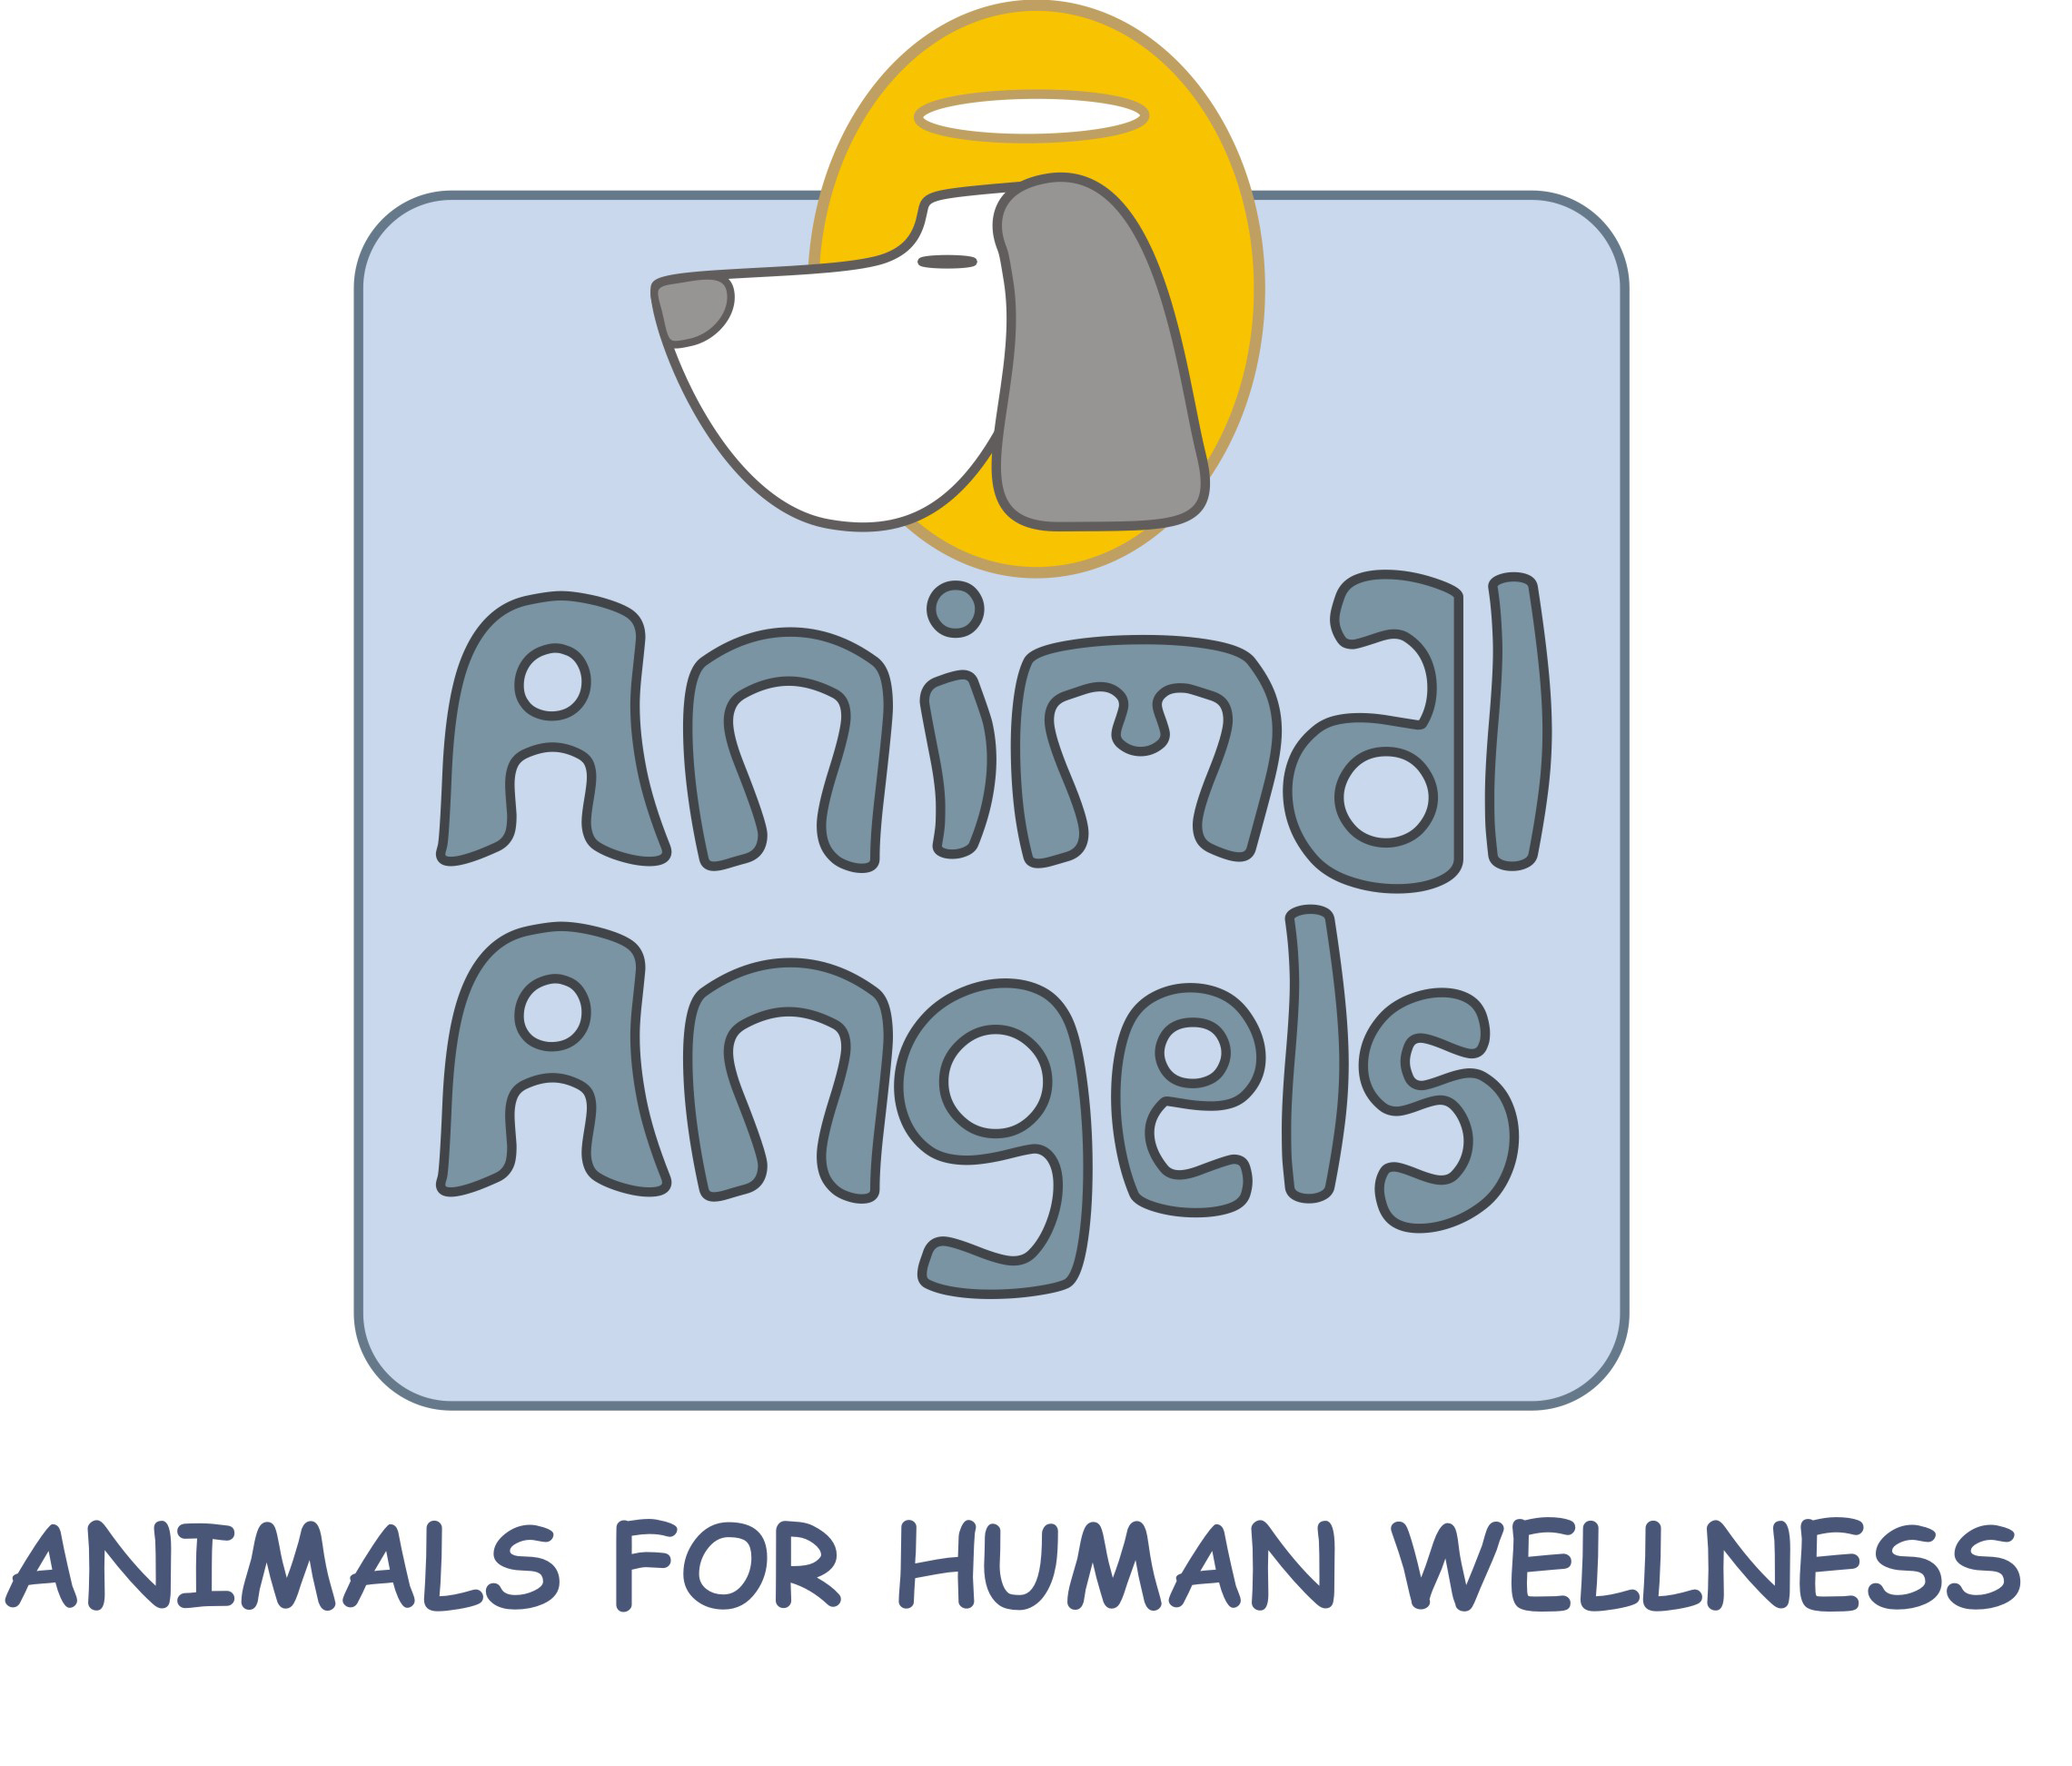 About Animal Angels Foundation | ProjectHeena